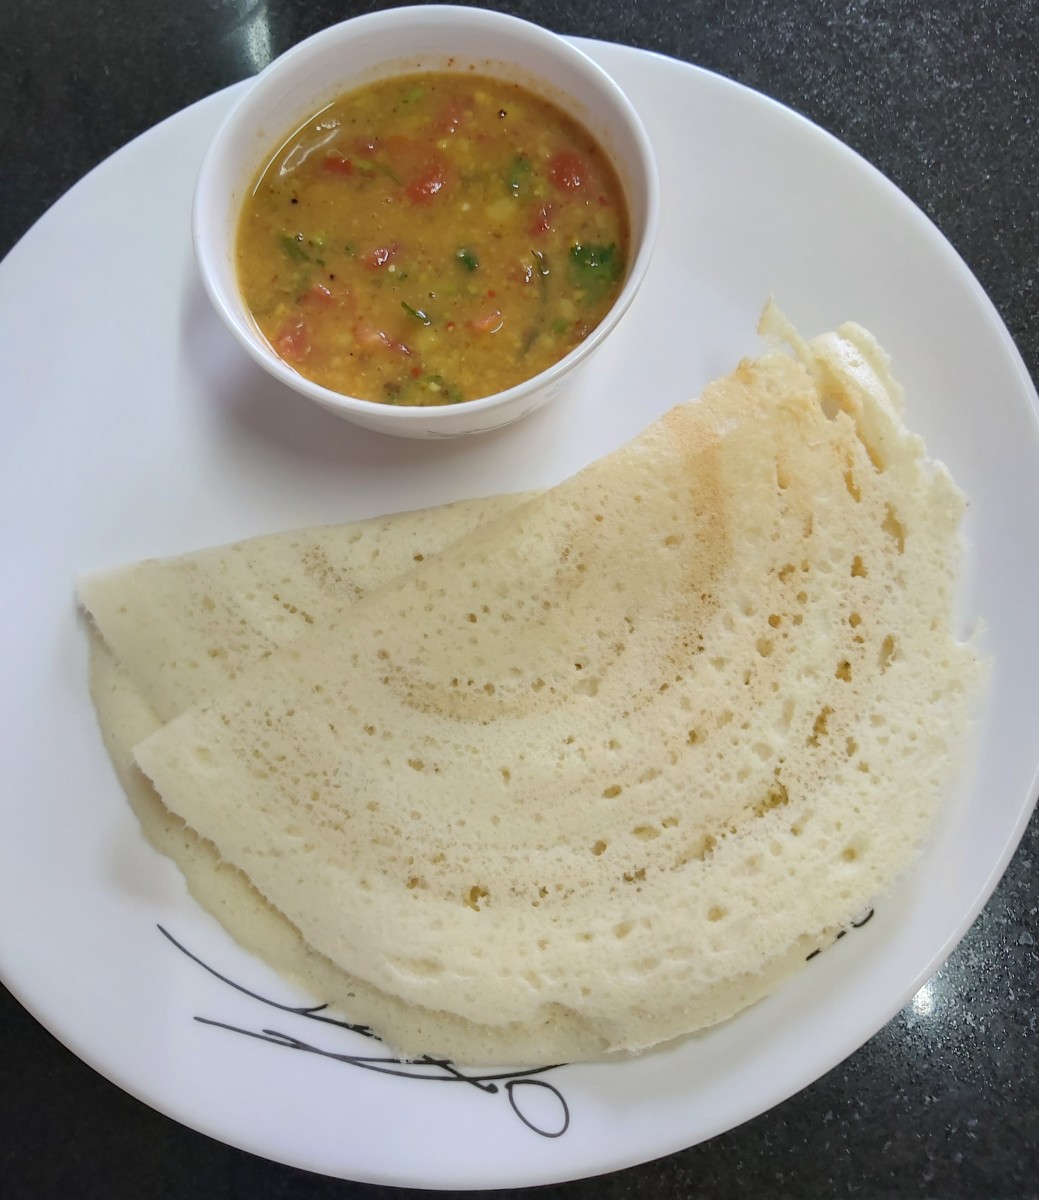 Serve hot sambar with idli or dosa. It also goes well with other breakfasts like uttapam or vada.